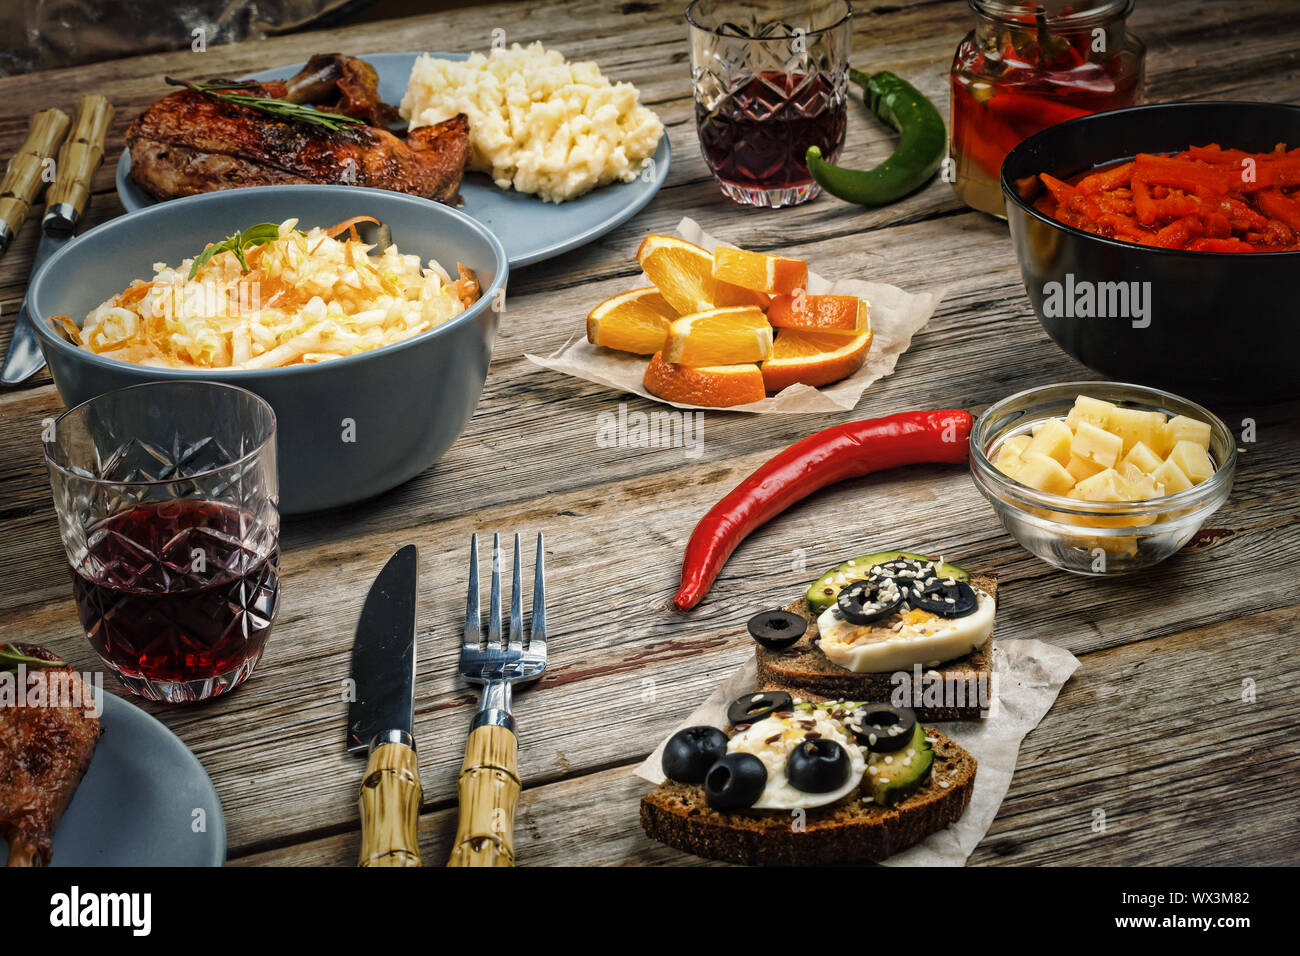 American cuisine, Roasted chicken, various dishes, close up Stock Photo